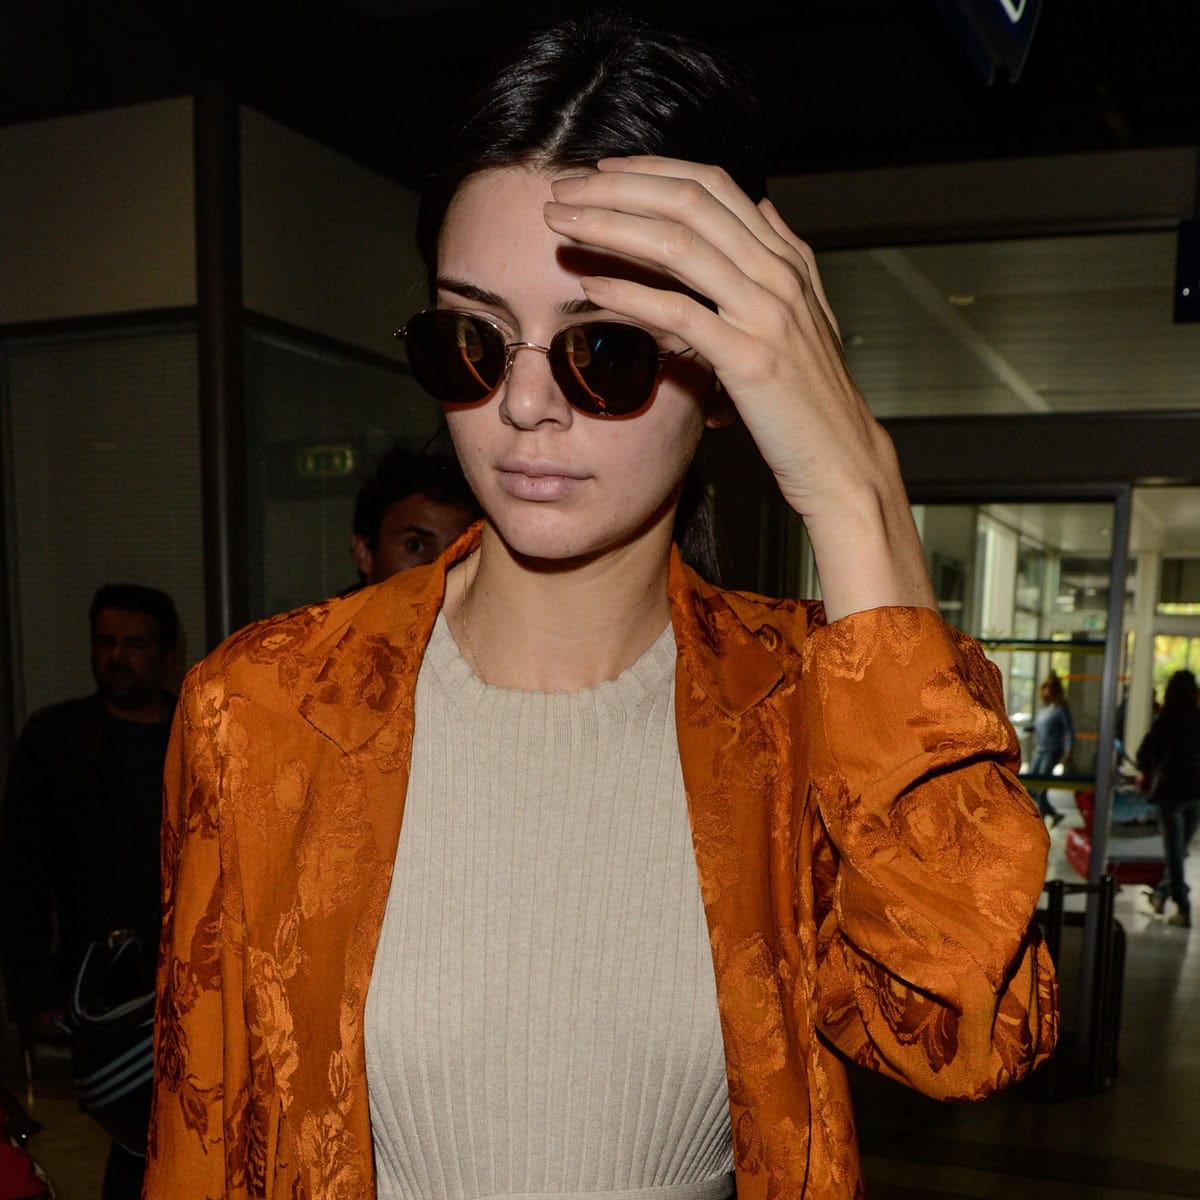 Kendall Jenner shields her face with sunglasses, showing a natural look with visible acne